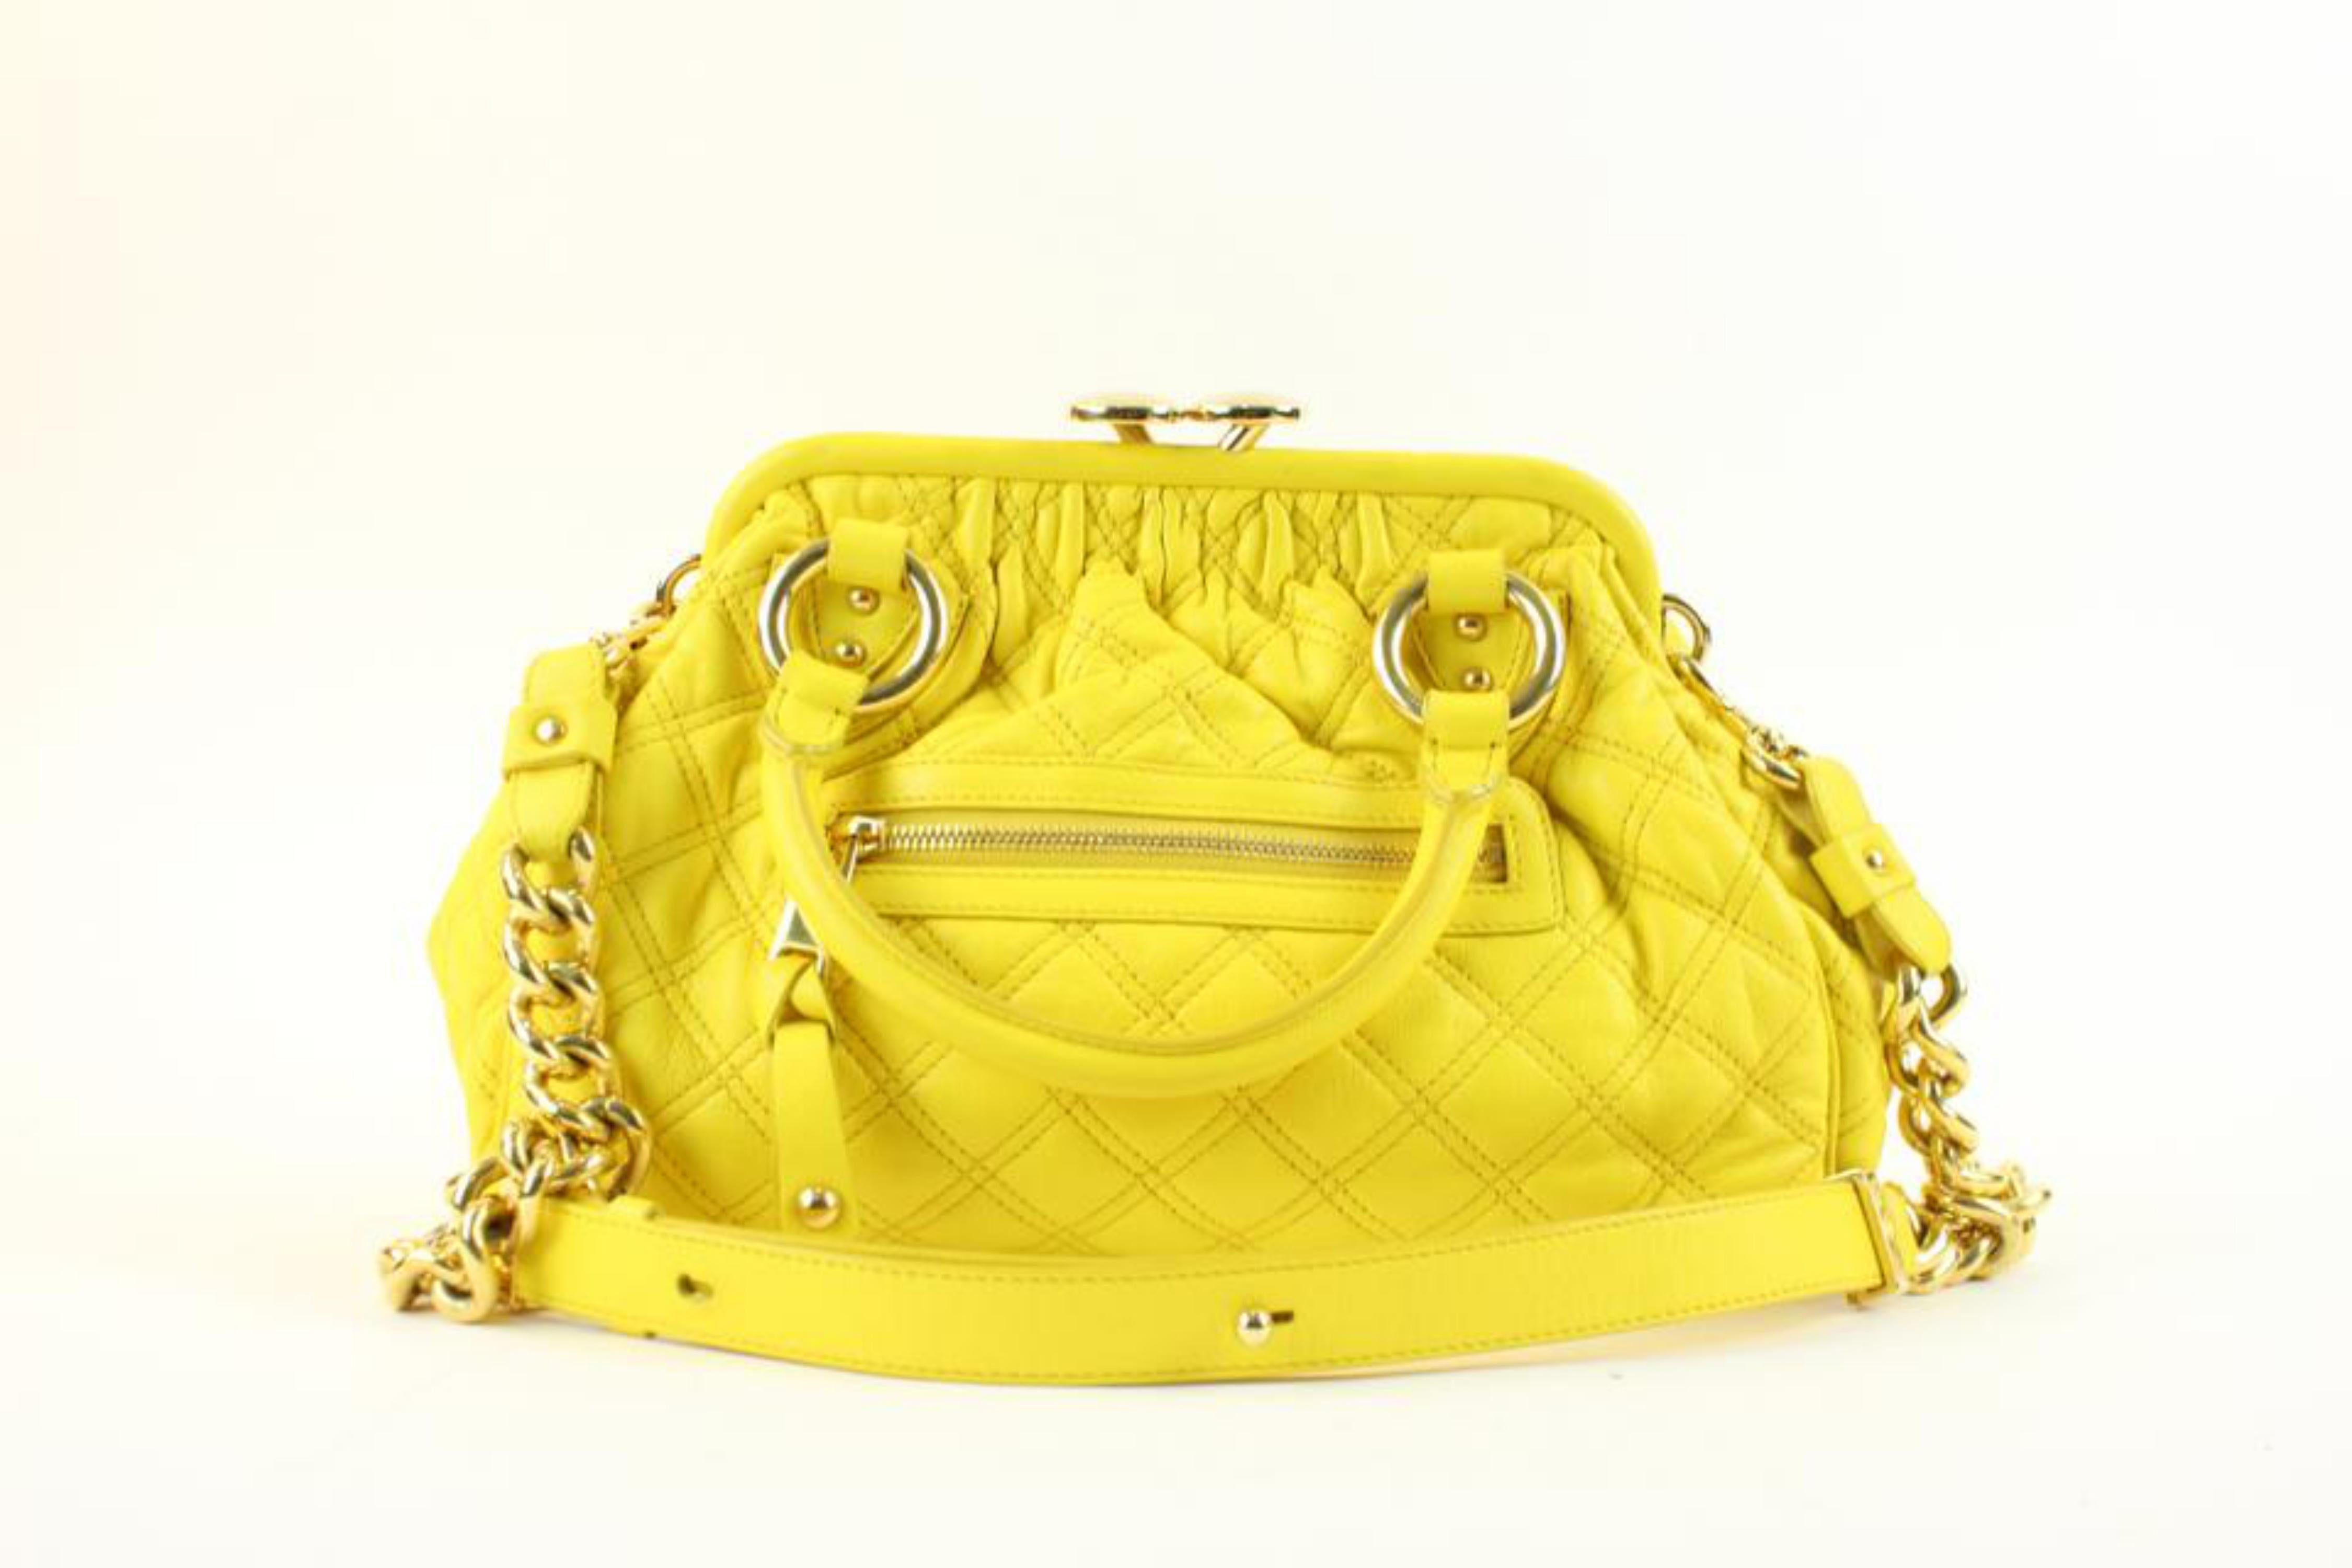 Marc Jacobs Quilted Stam 140mja1025 Yellow Shoulder Bag In Fair Condition For Sale In Forest Hills, NY